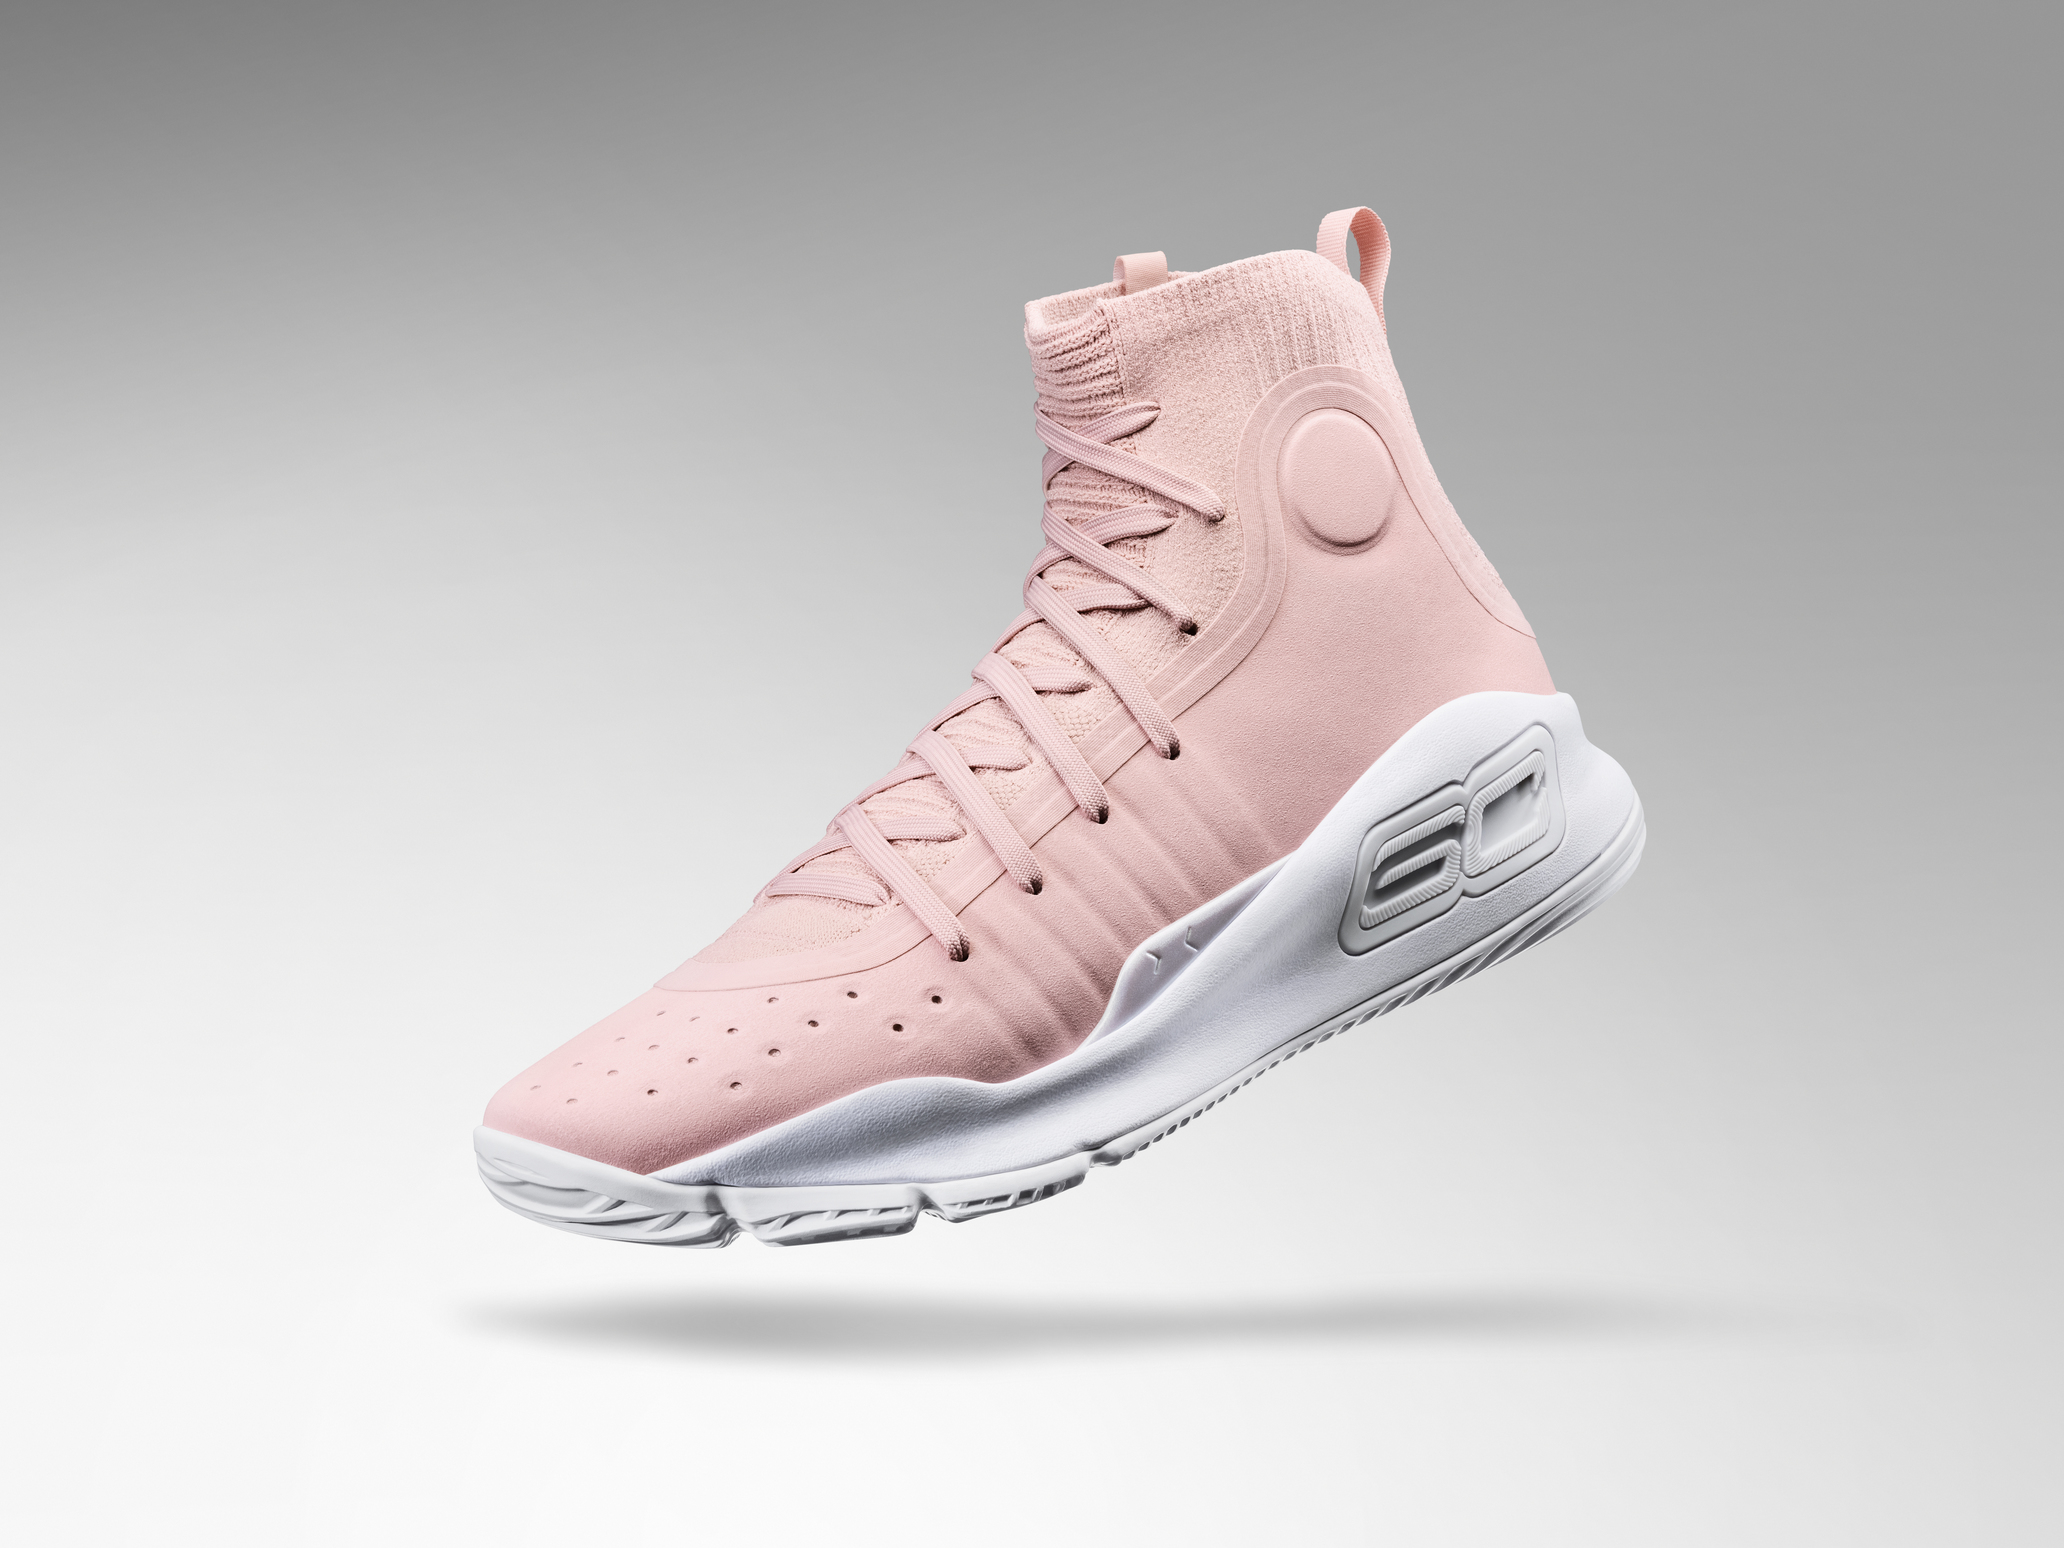 The Curry 4 'Flushed Pink' Celebrates 